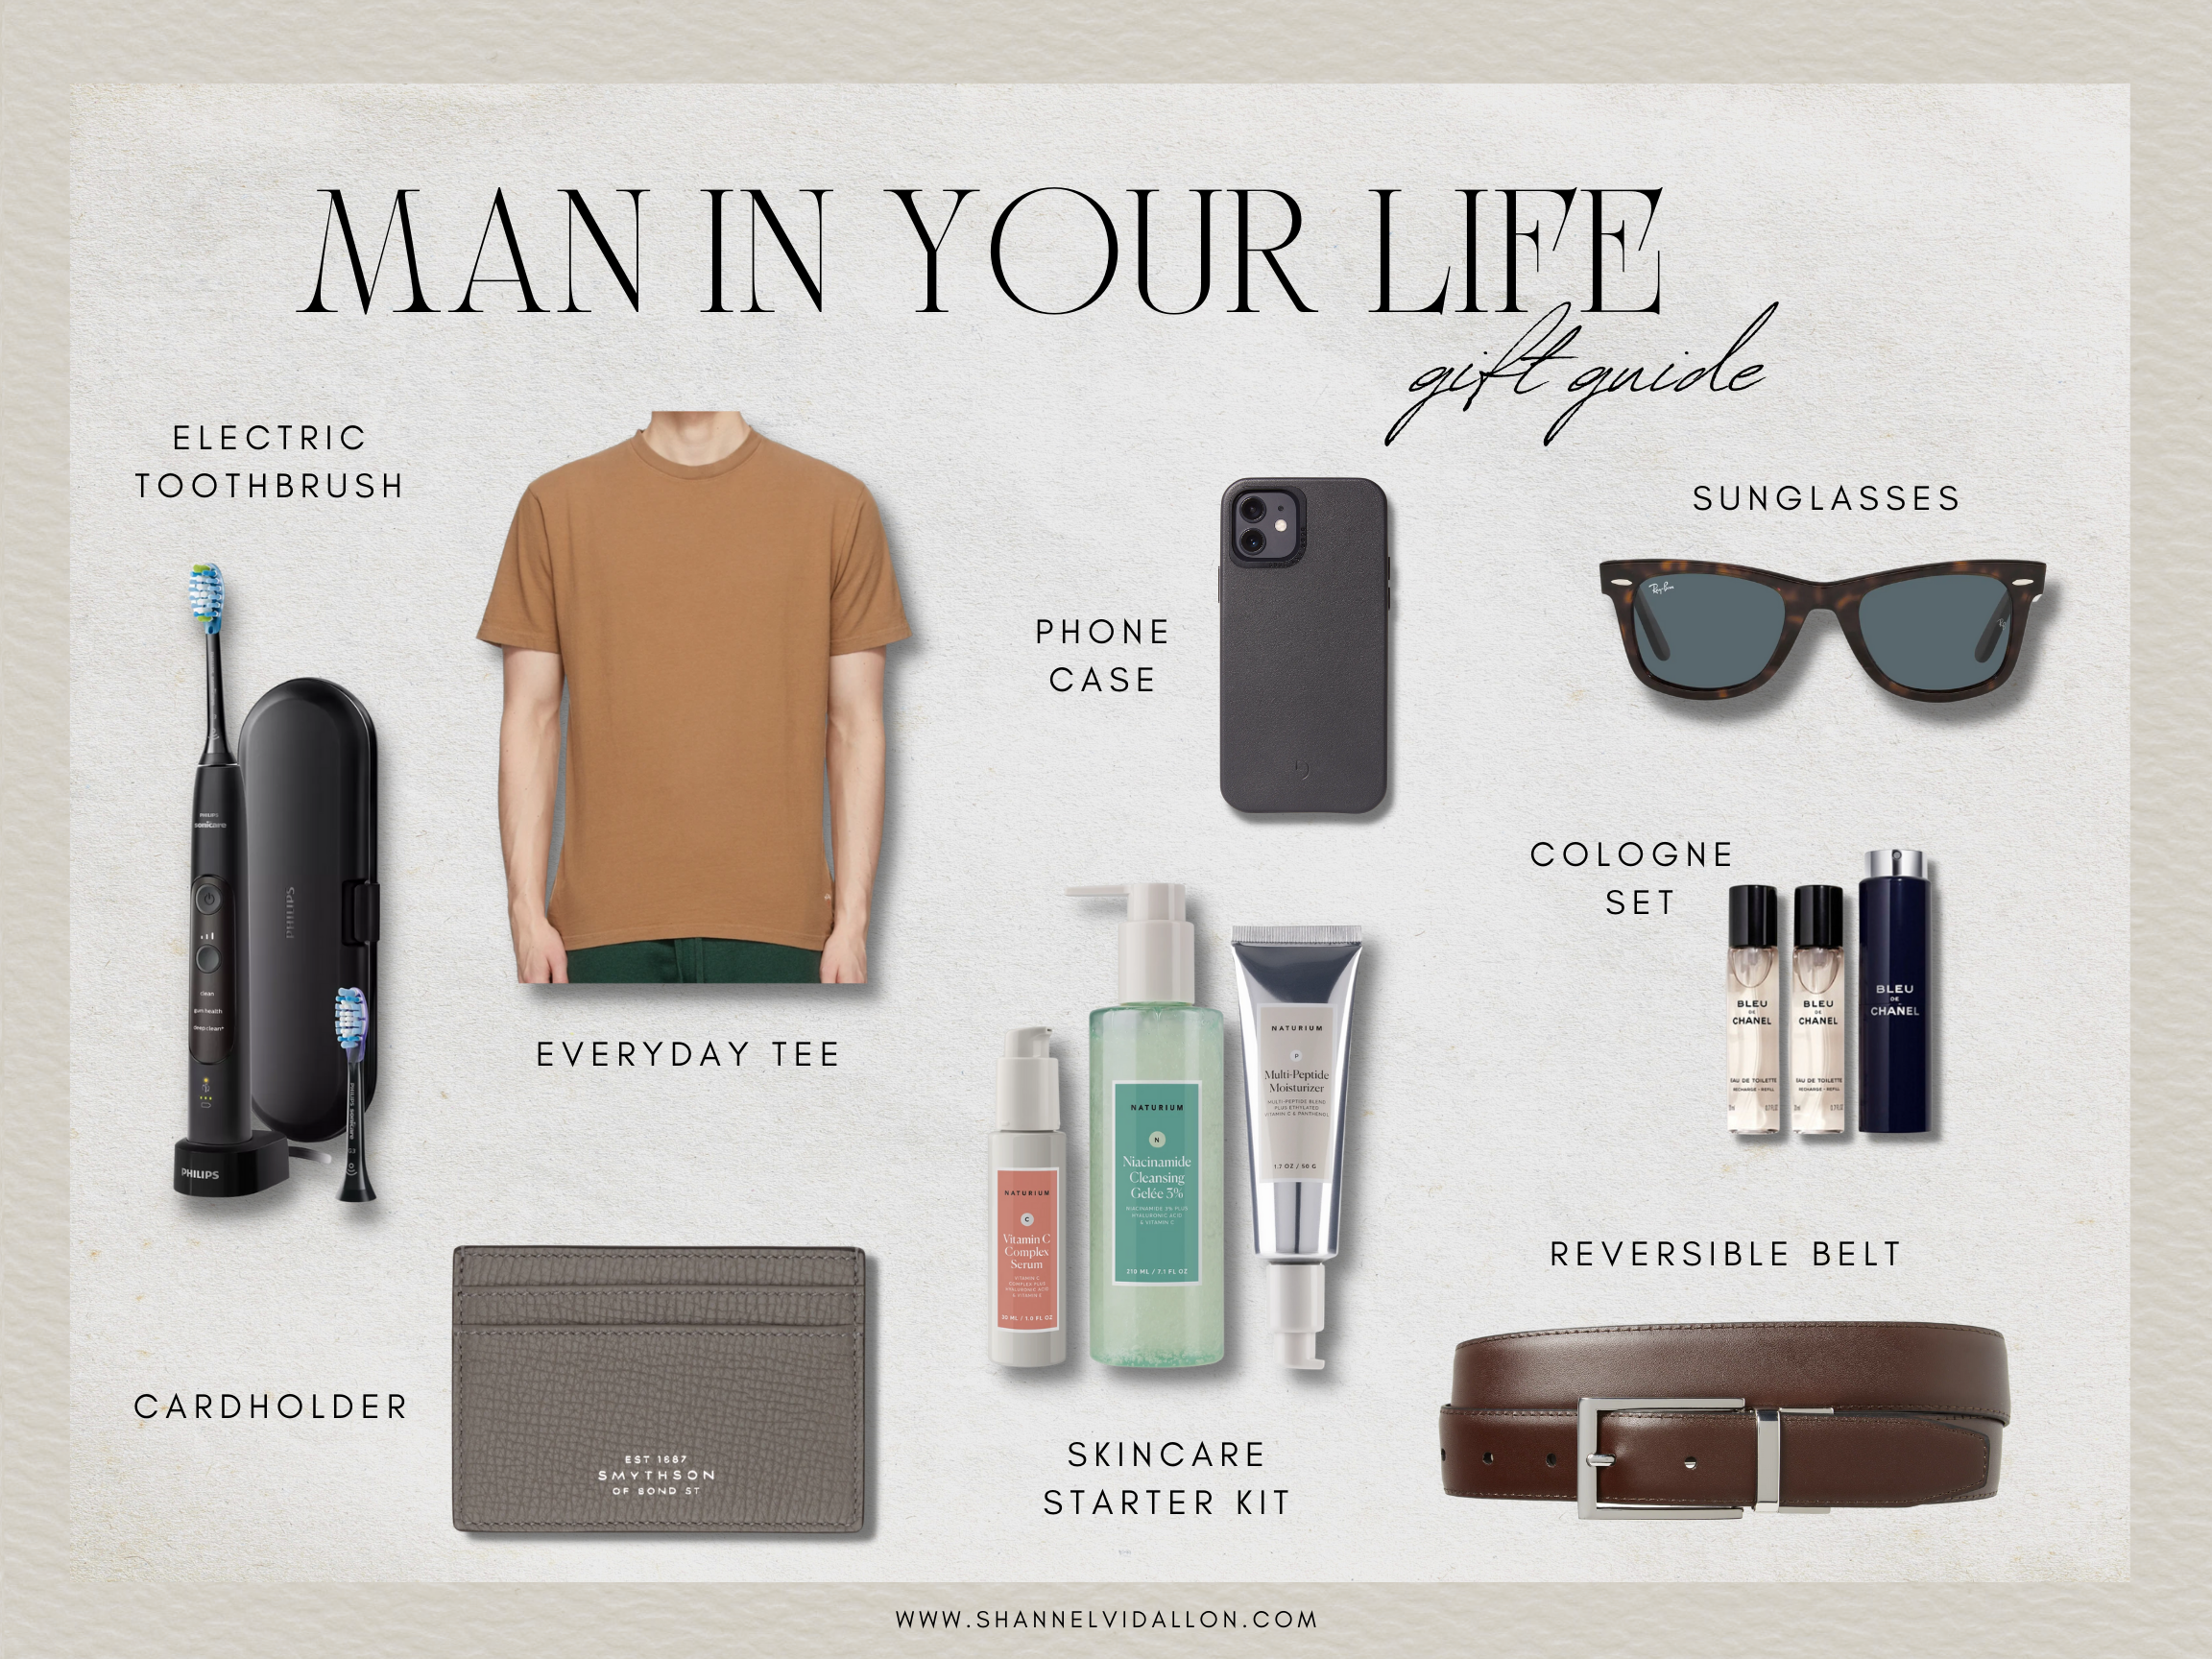 Black Friday Cyber Monday Holiday Gift Guide: Man in Your Life